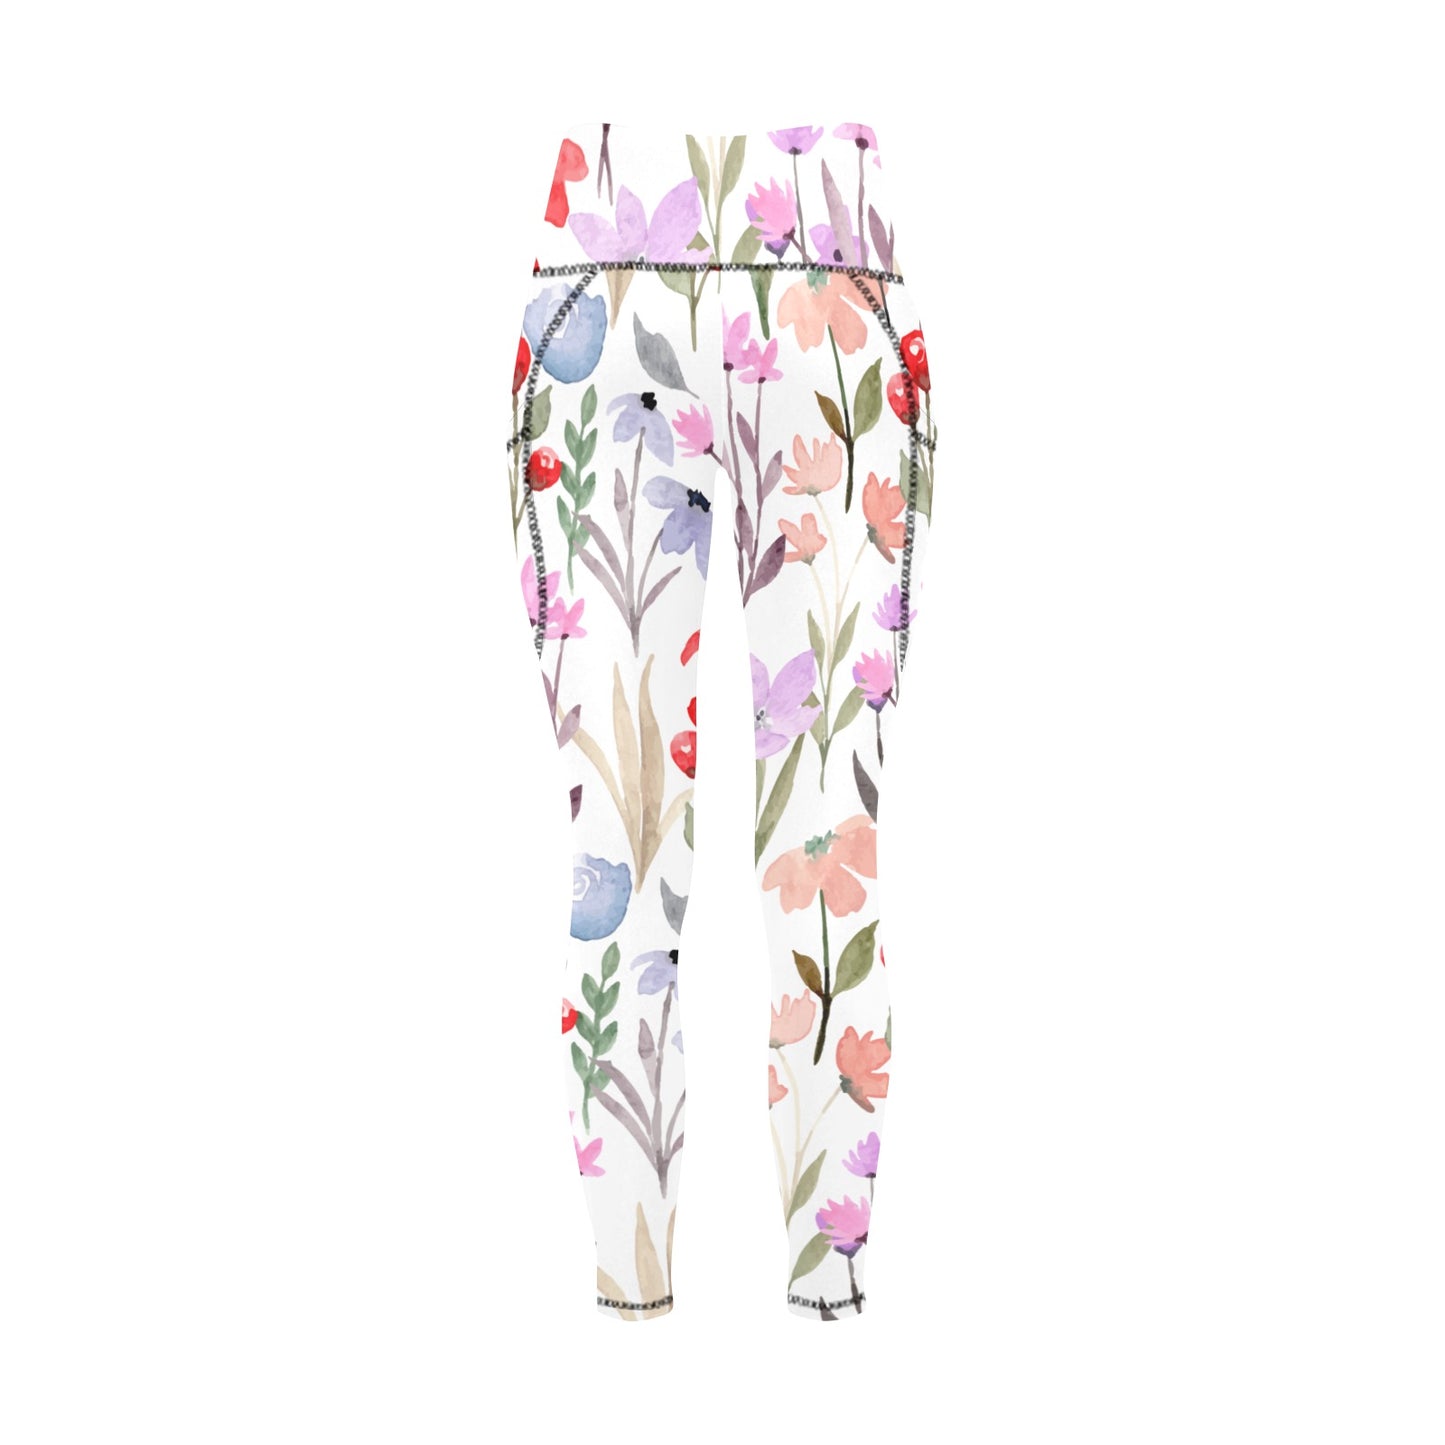 Floral Watercolour - Women's Leggings with Pockets Women's Leggings with Pockets S - 2XL Plants